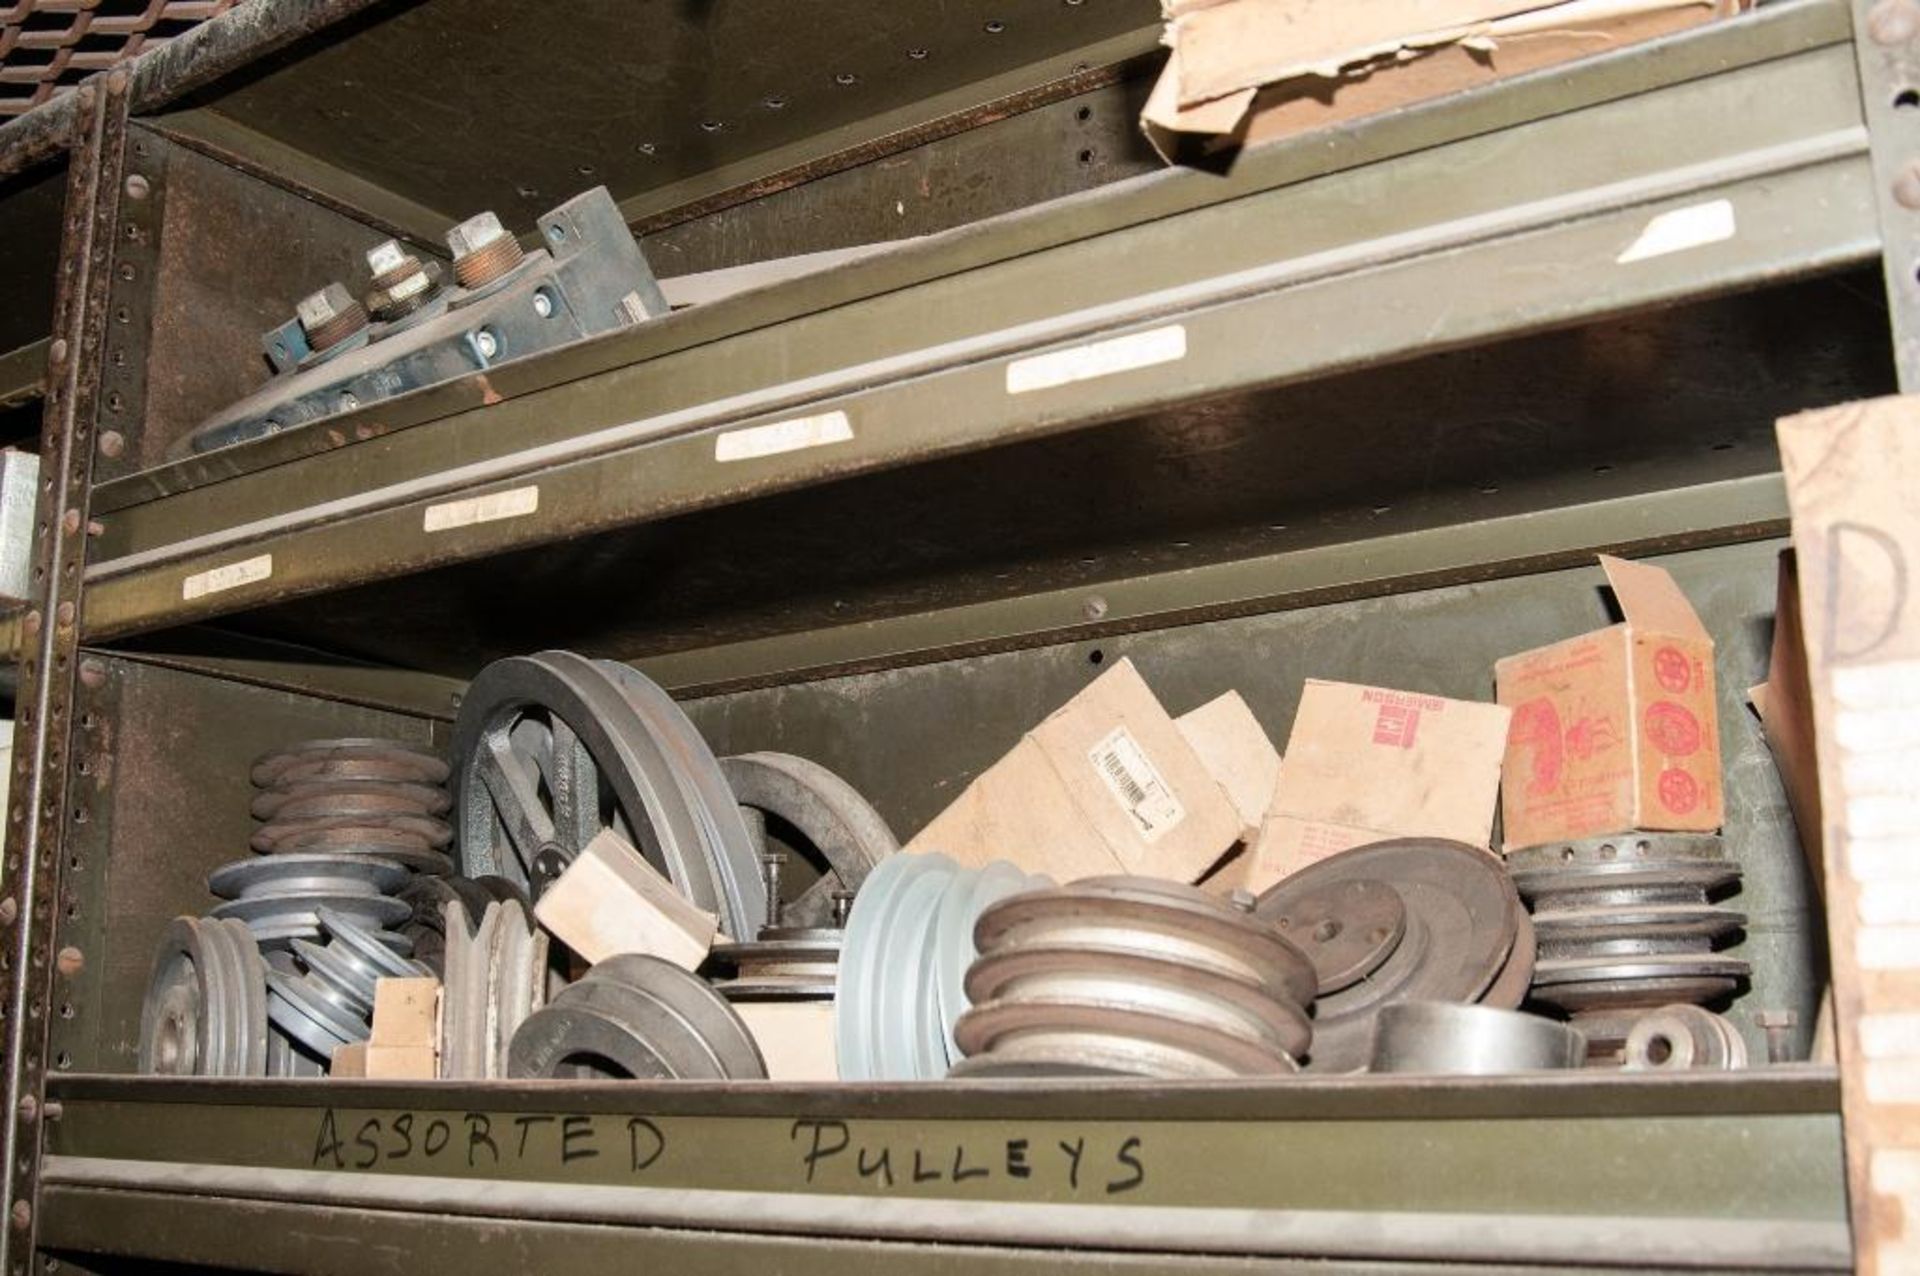 Bearings, Sprockets, Oil Seals, Pulleys and Springs(No Shelfs or Dolly) - Image 9 of 17